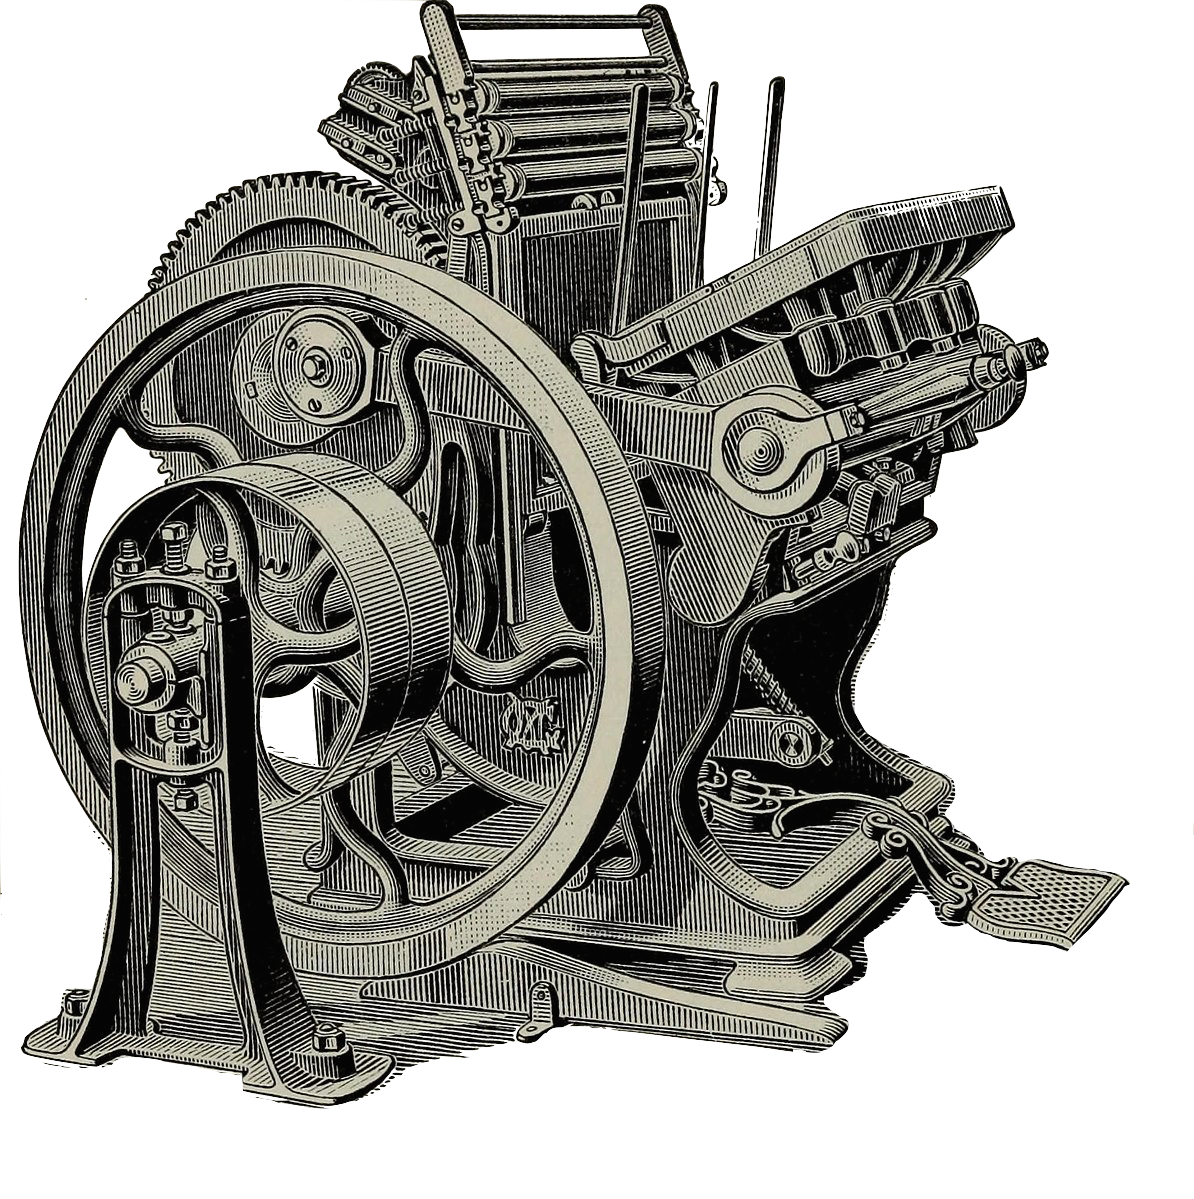 Image of old-fashioned printing press